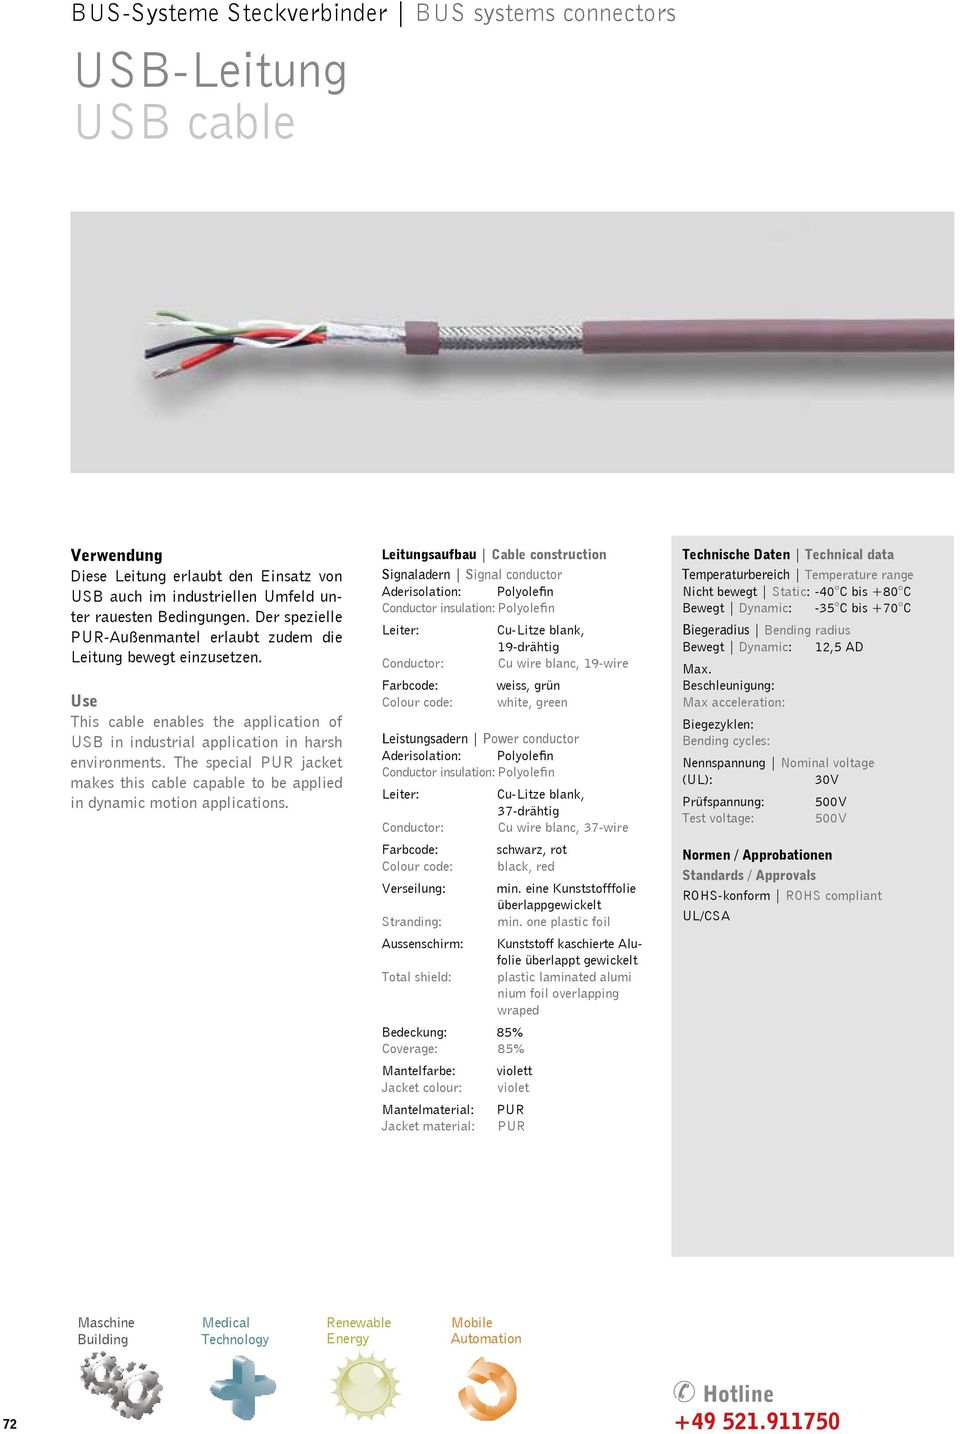 The special PUR jacket makes this cable capable to be applied in dynamic motion applications.